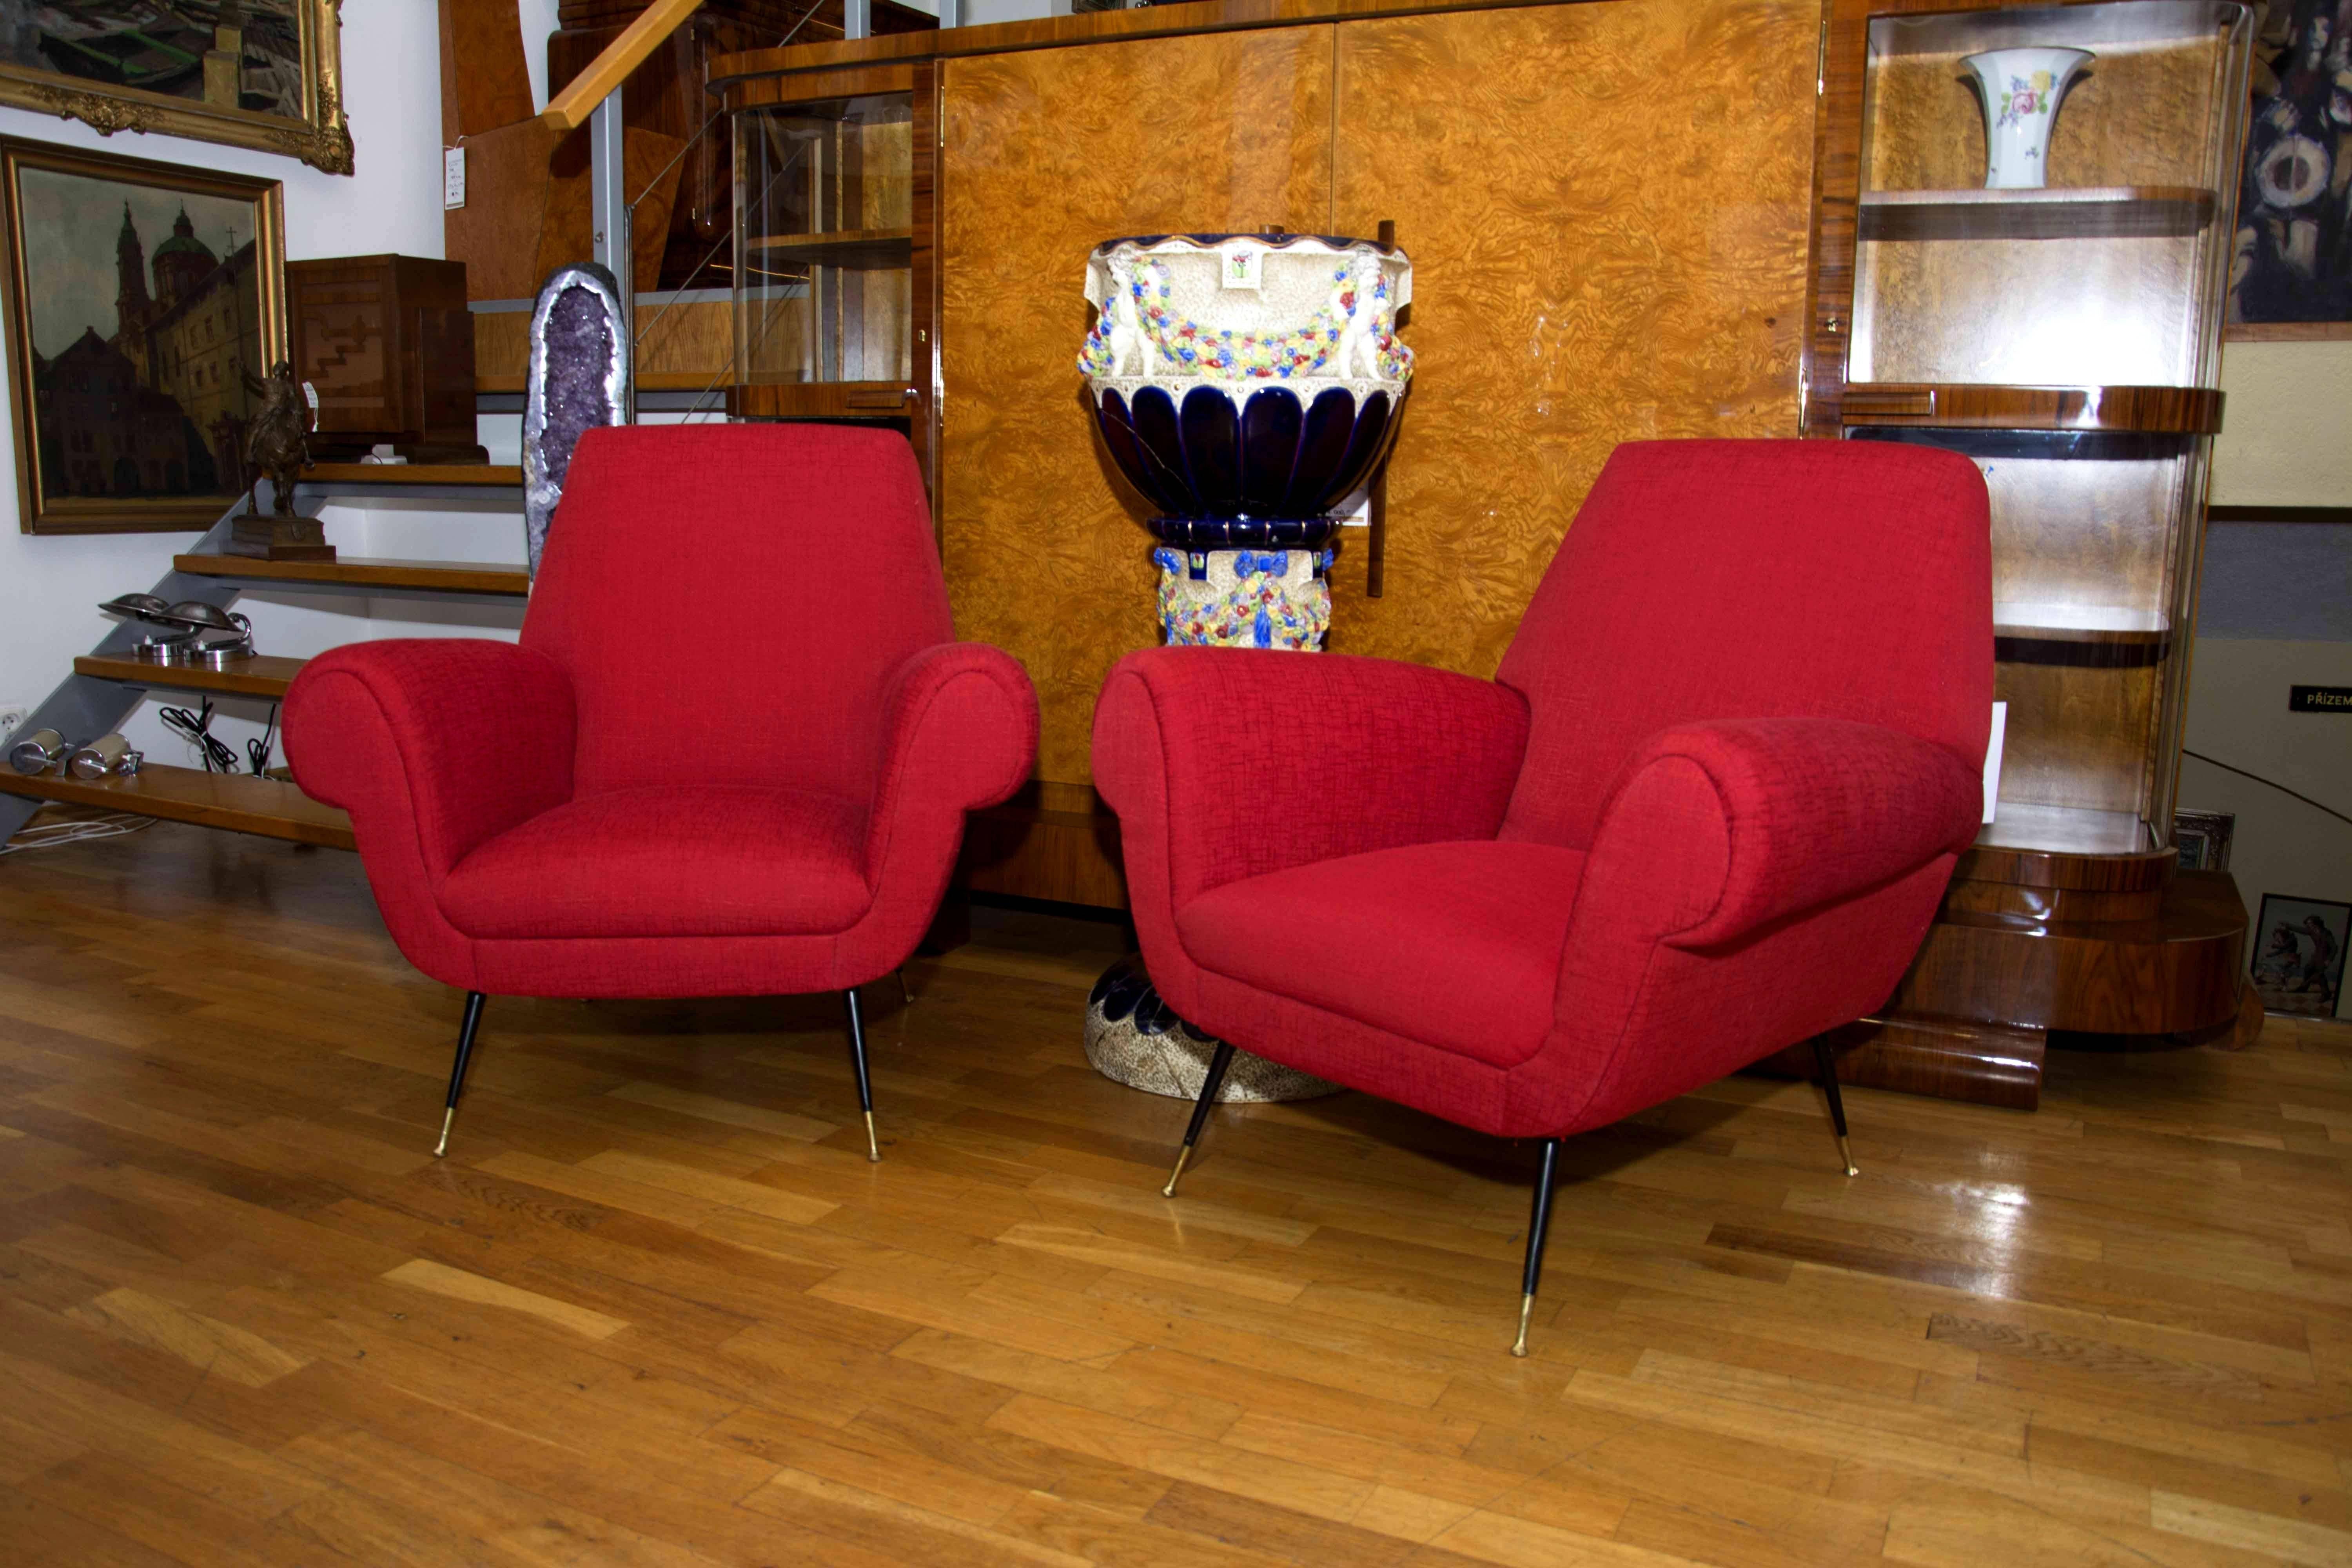 This pair of midcentury Italian lounge armchairs was designed by Gigi Radice for Minotti in the 1950s. The chairs feature new red upholstery and black-lacquered steel and brass legs.